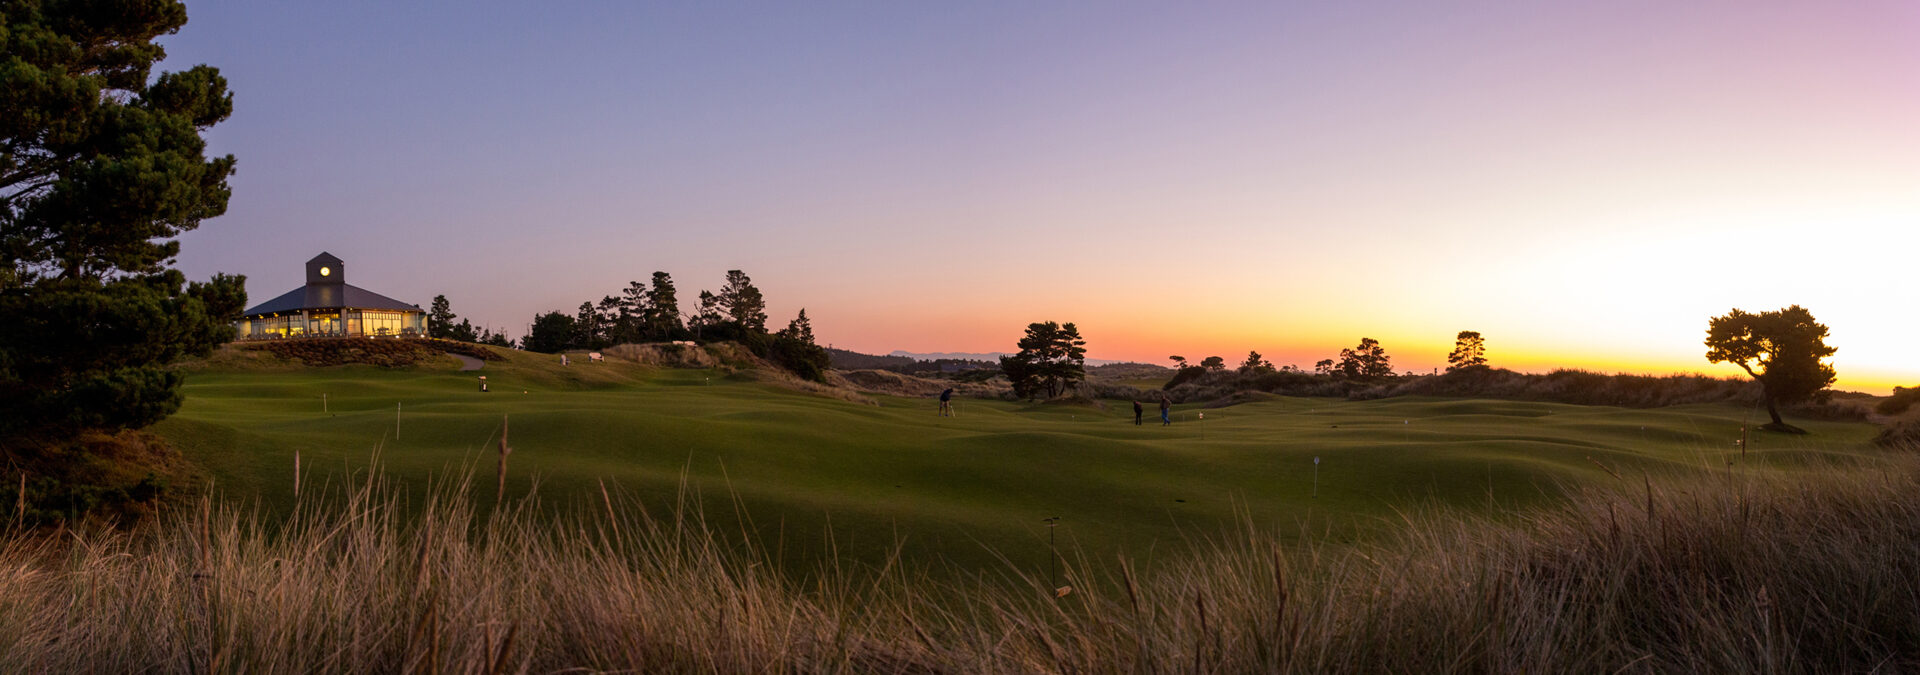 The Punchbowl at sunset